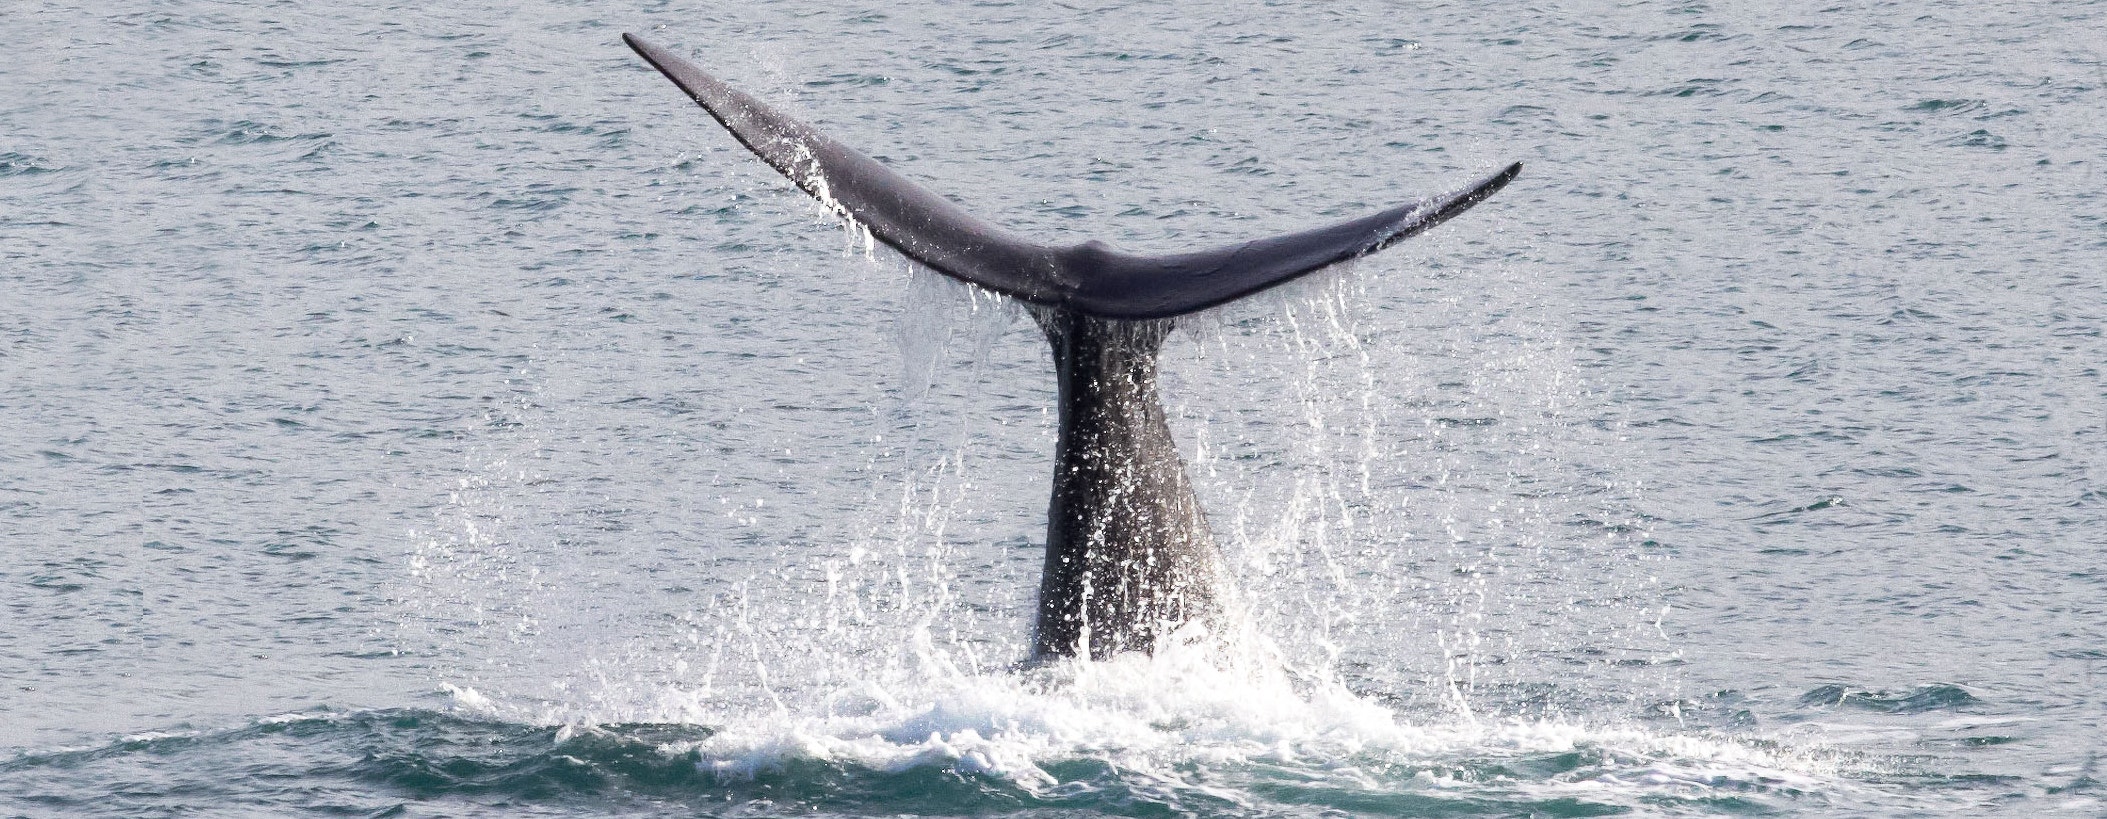 The tail of a whale as it dives into the ocean